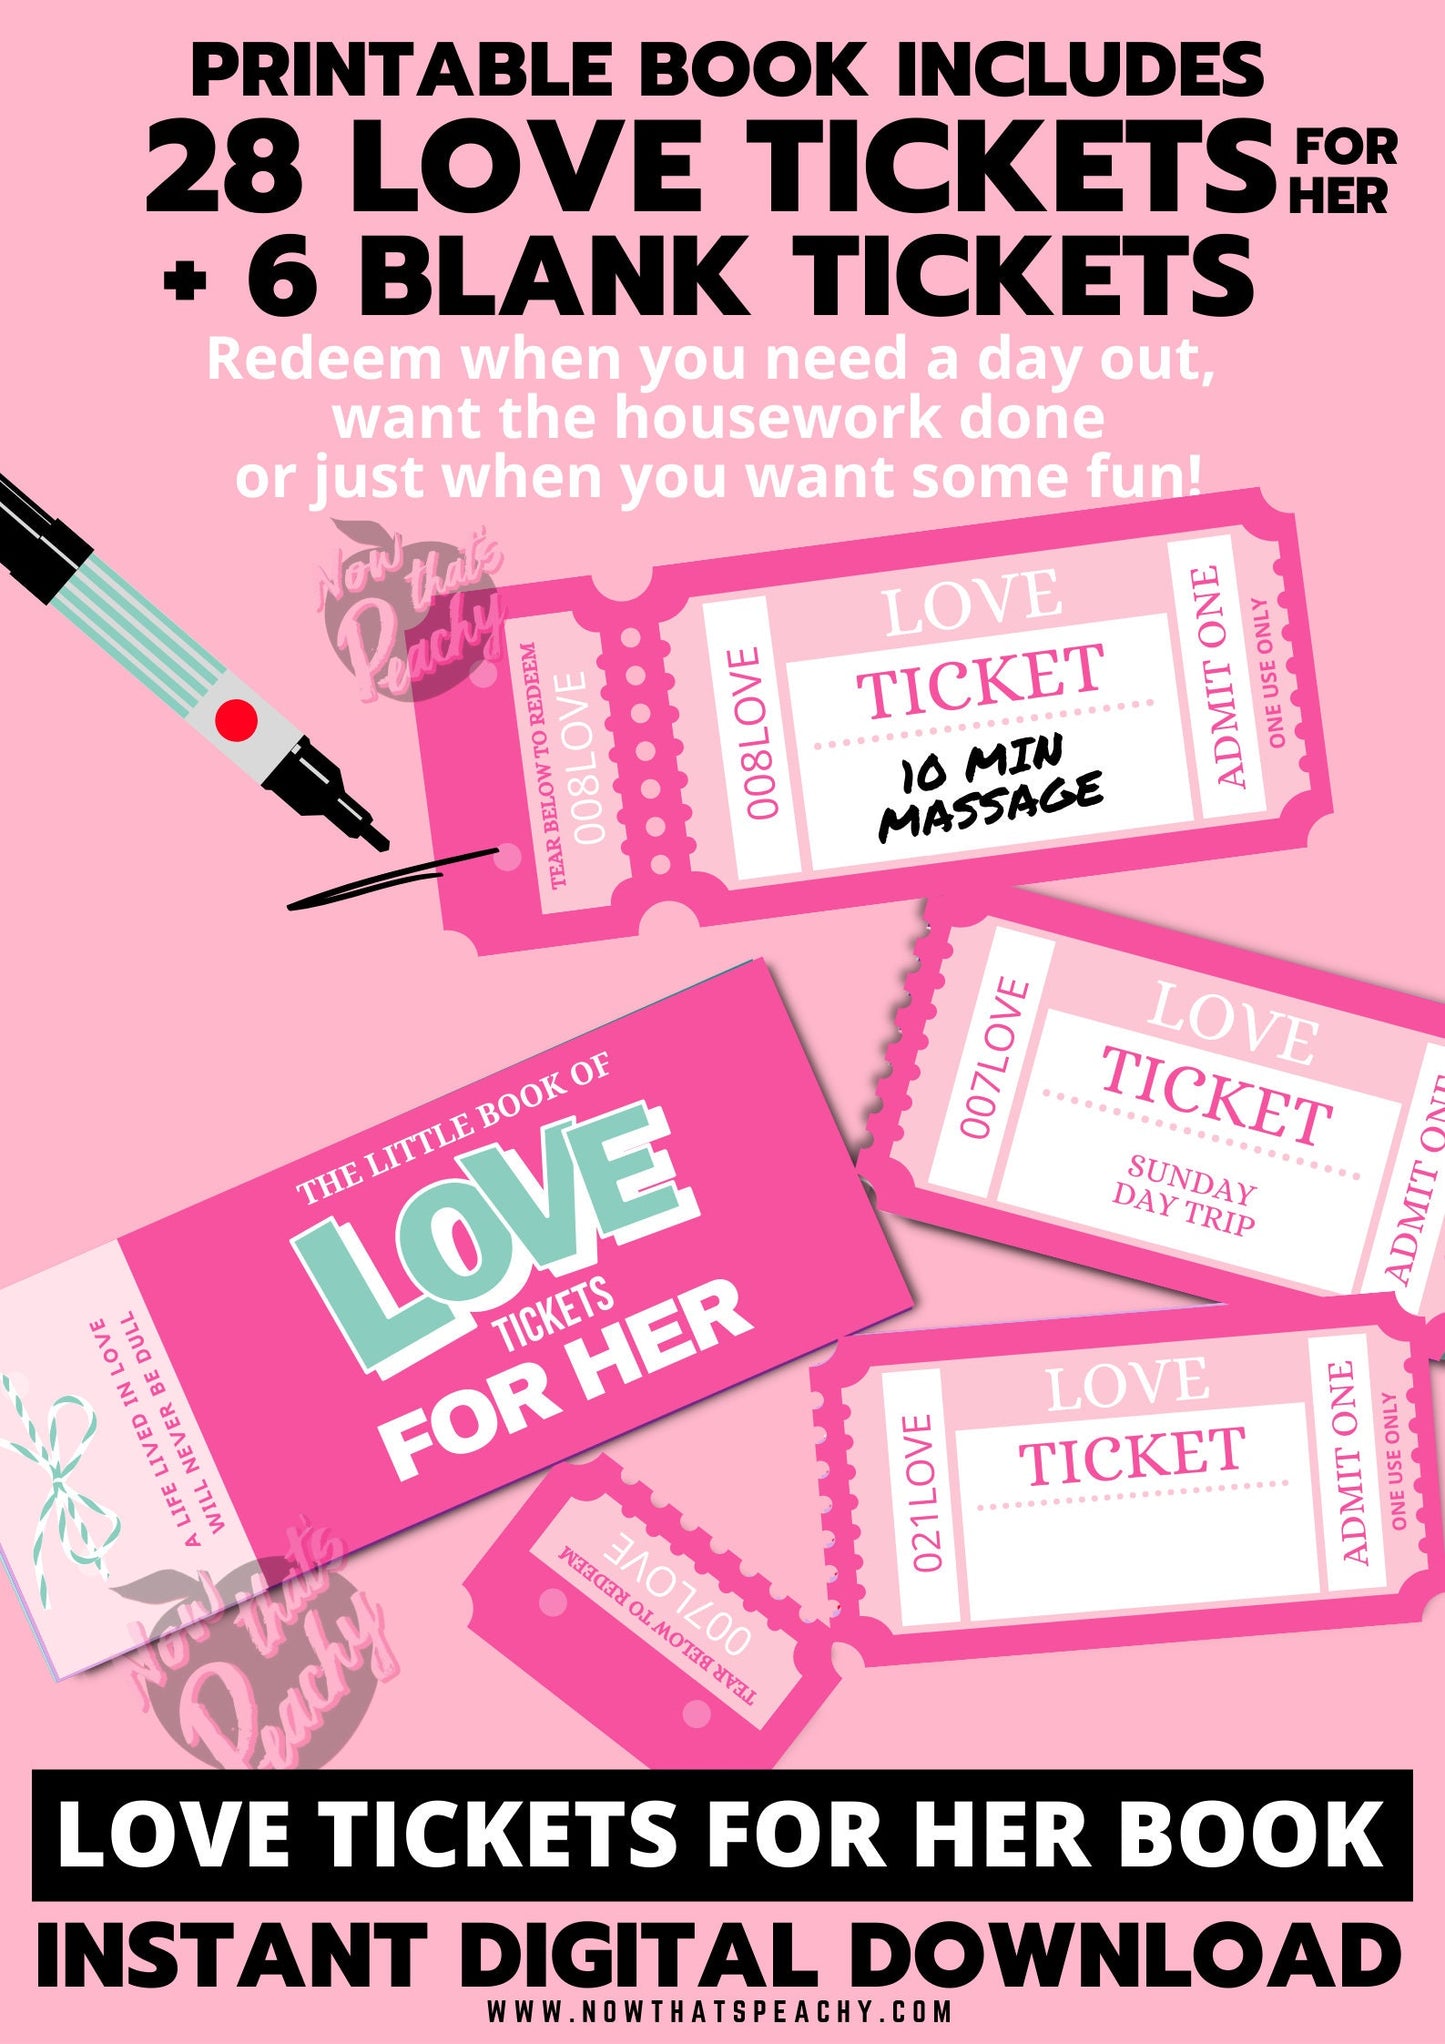 Shop for Couples Date ideas Ticket Voucher Coupon book printable diy print off valentines anniversary wife husband digital download fun cute idea present  print off retro vintage theme night out boyfriend girlfriend partner mrs man lady boy girl  adult explore anti vday  product shop easy cheap affordable personalized custom wedding bride gifts